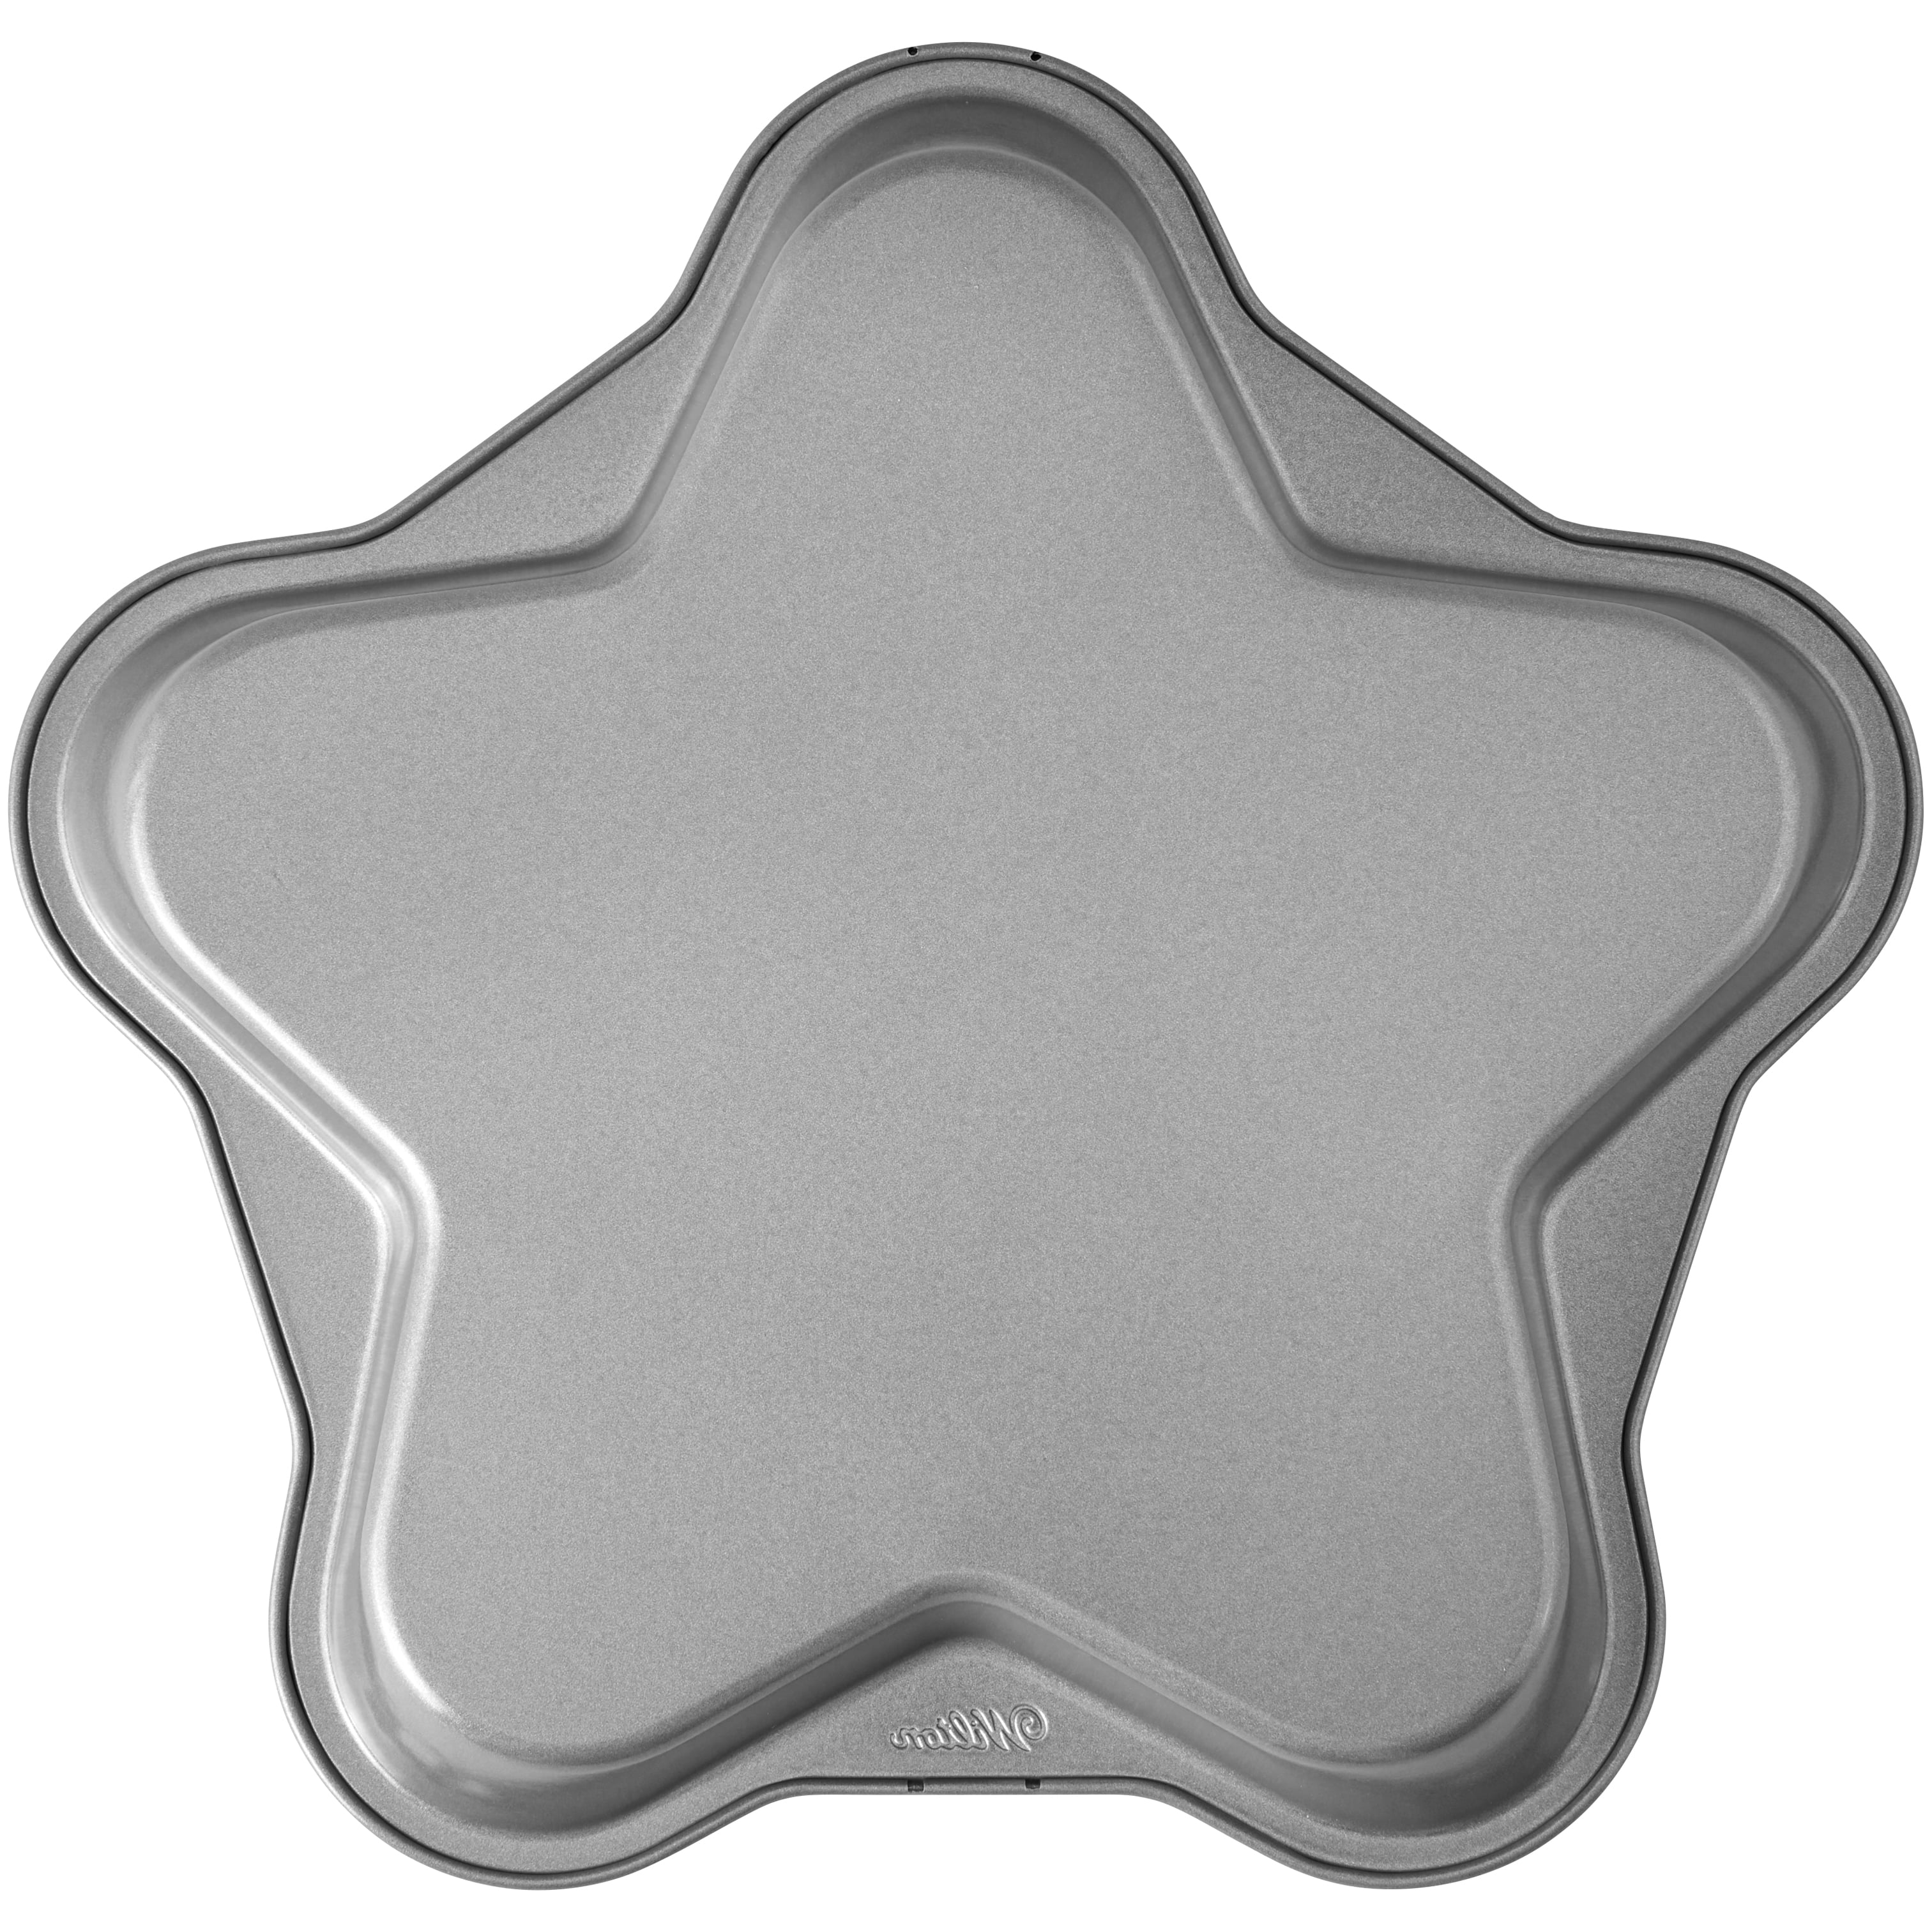 Wilton Star Pan ** Additional details at the pin image, click it